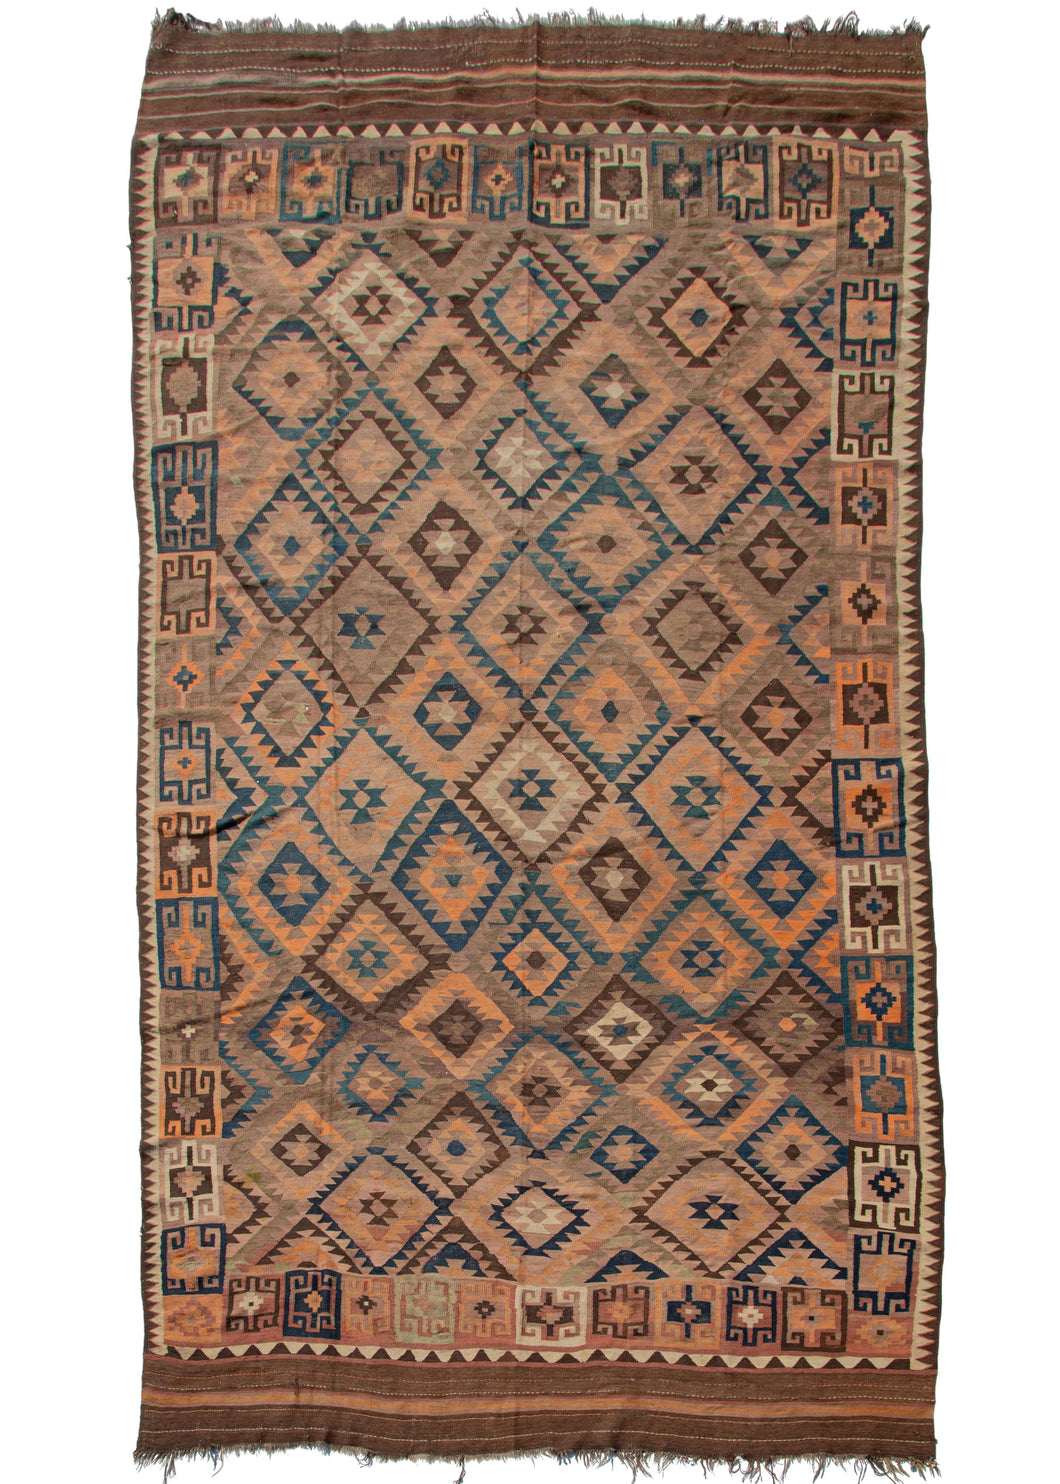 Antique Afghani Maimane palace sized kilim featuring a minimalist geometric design in a subtle color palette of indigo blue, deep browns, soft purples, and ivories. 